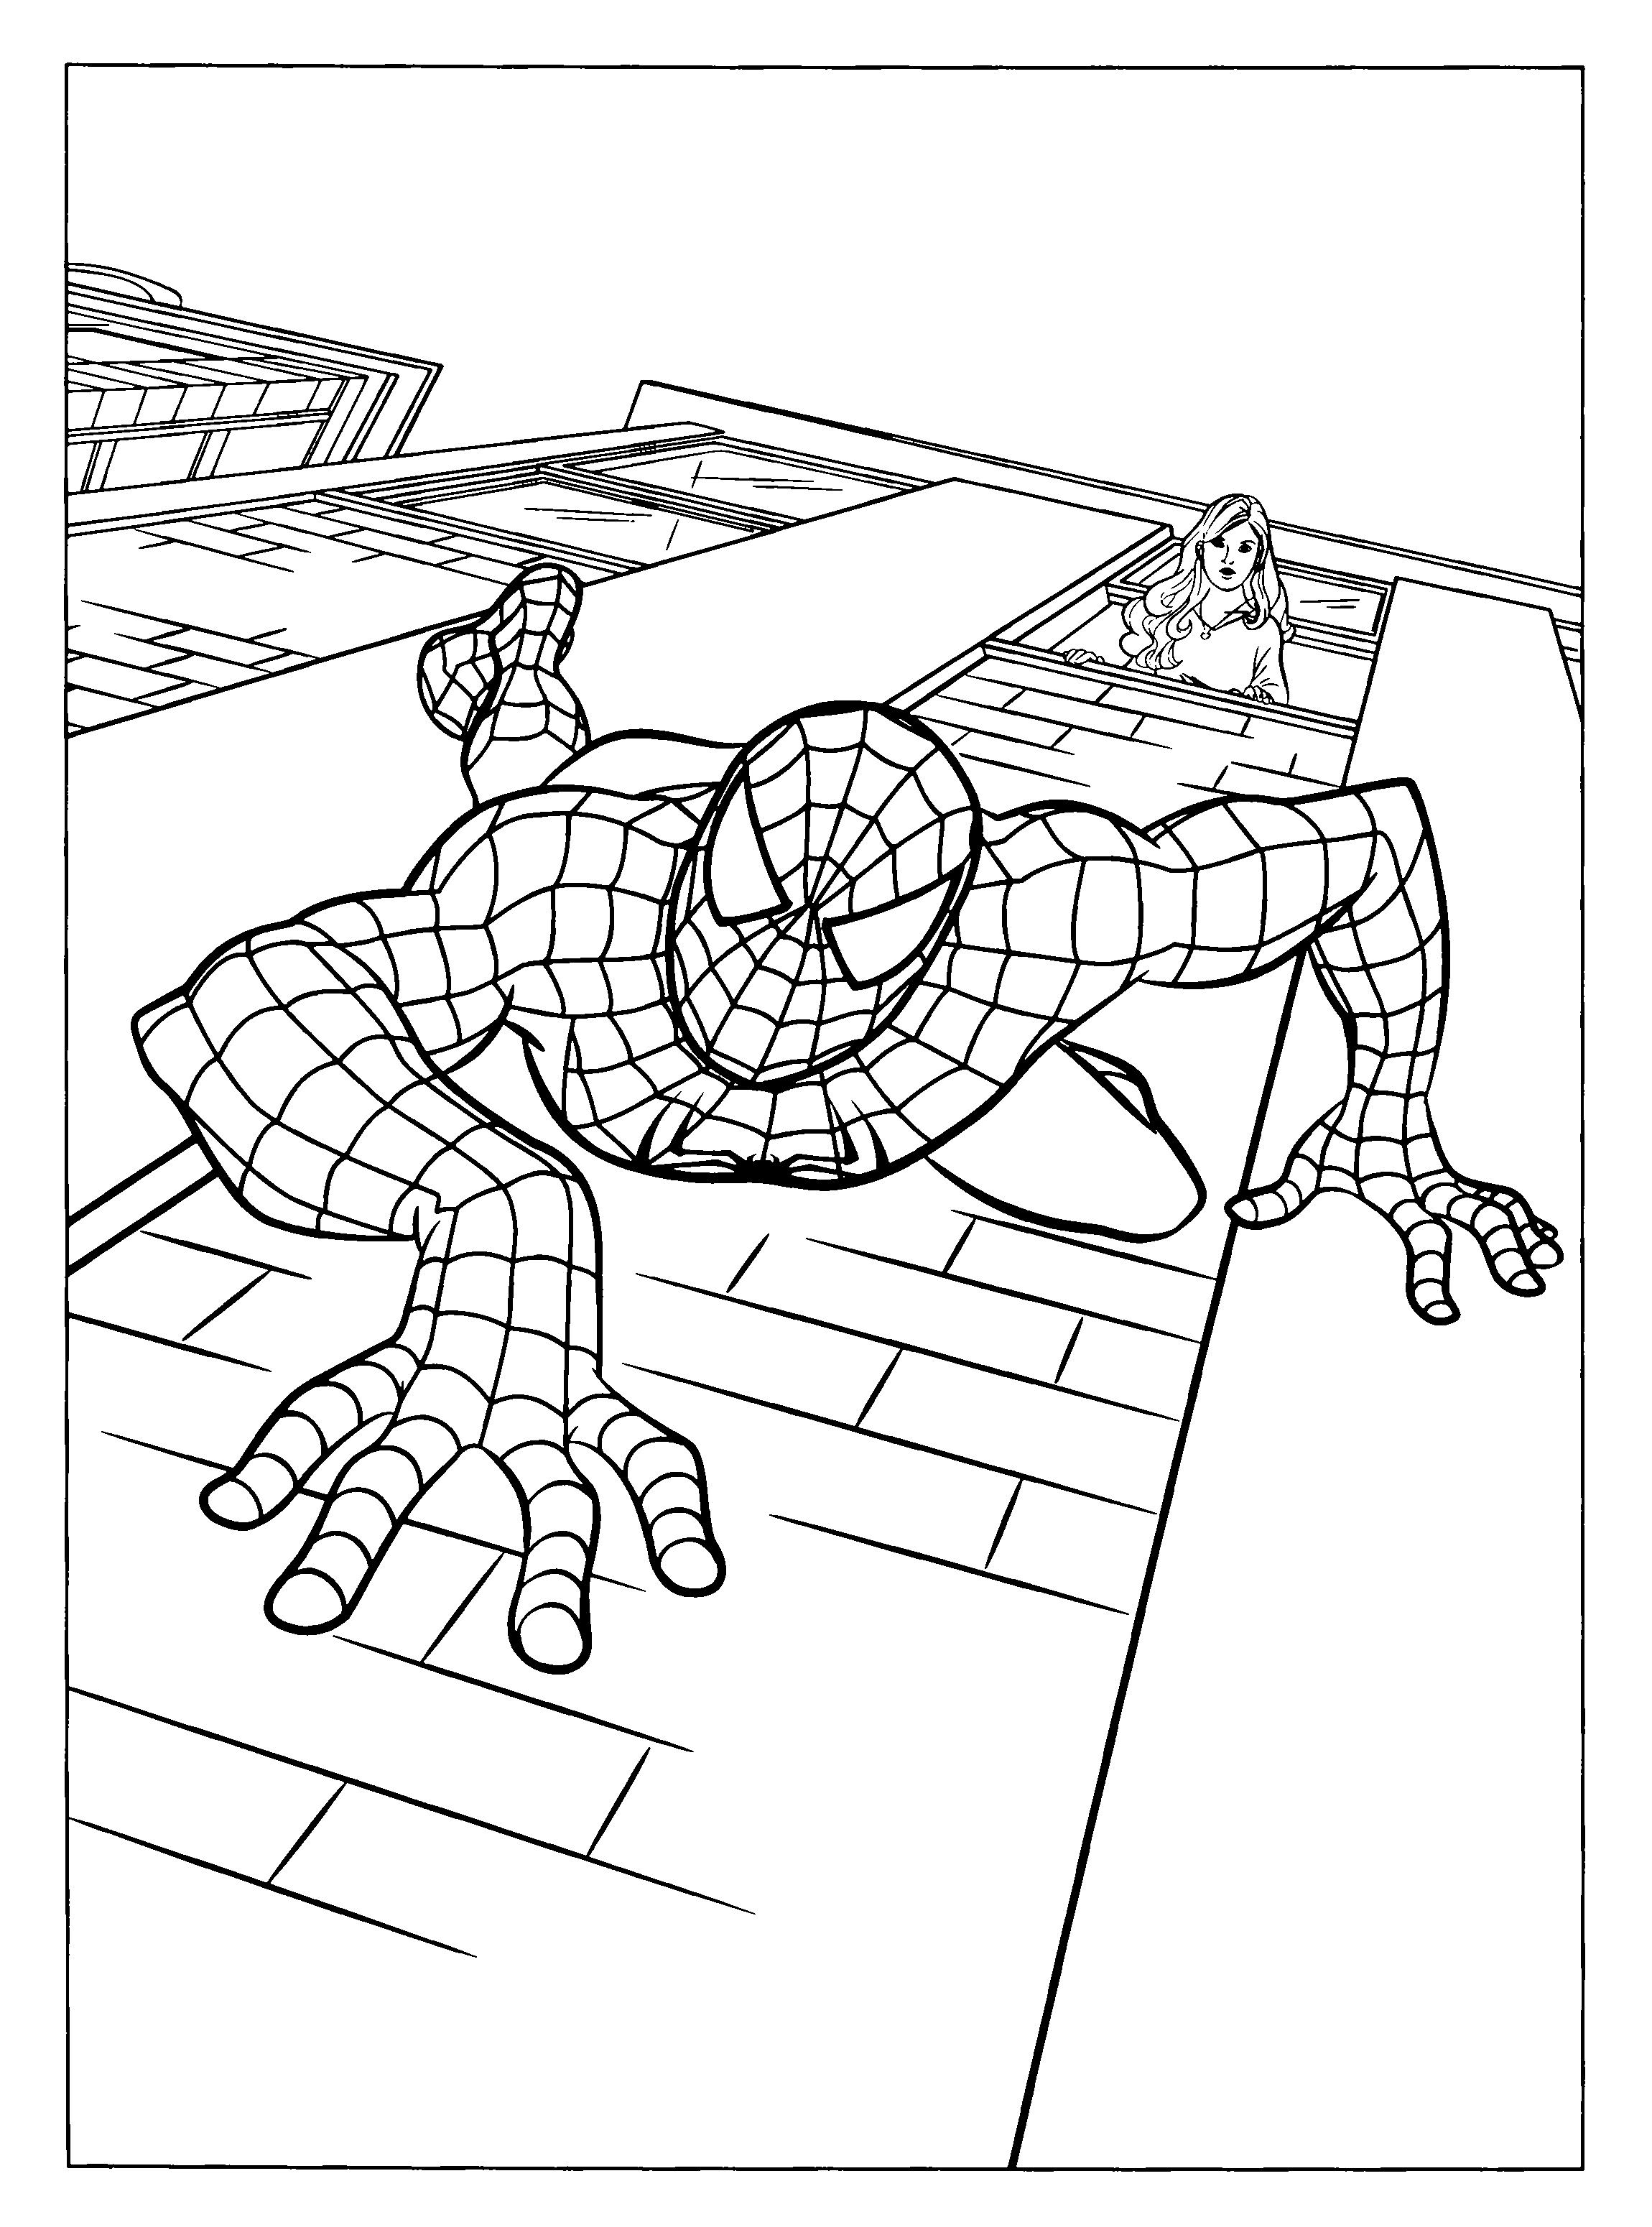 coloring-page-spiderman-3-coloring-pages-5